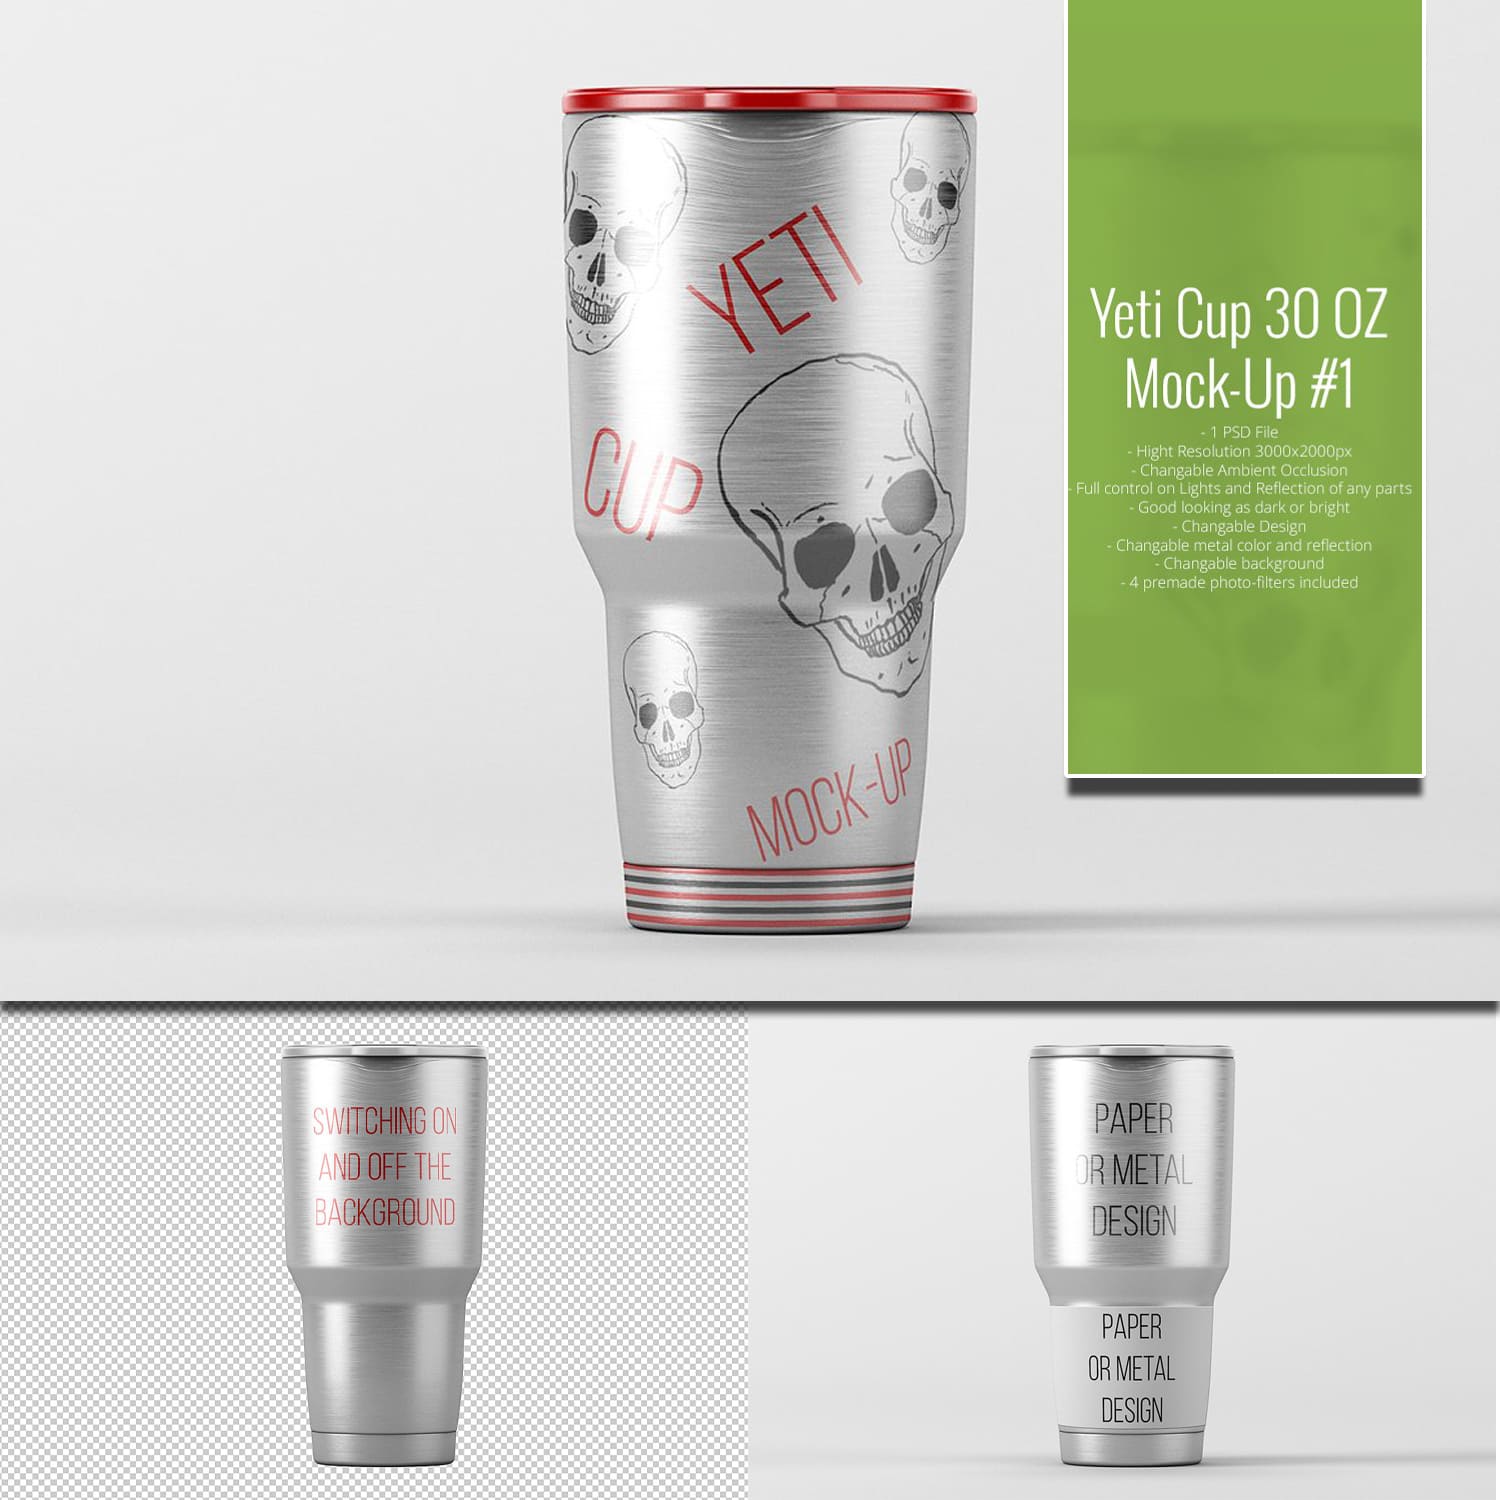 Yeti Cup Mock-Up.